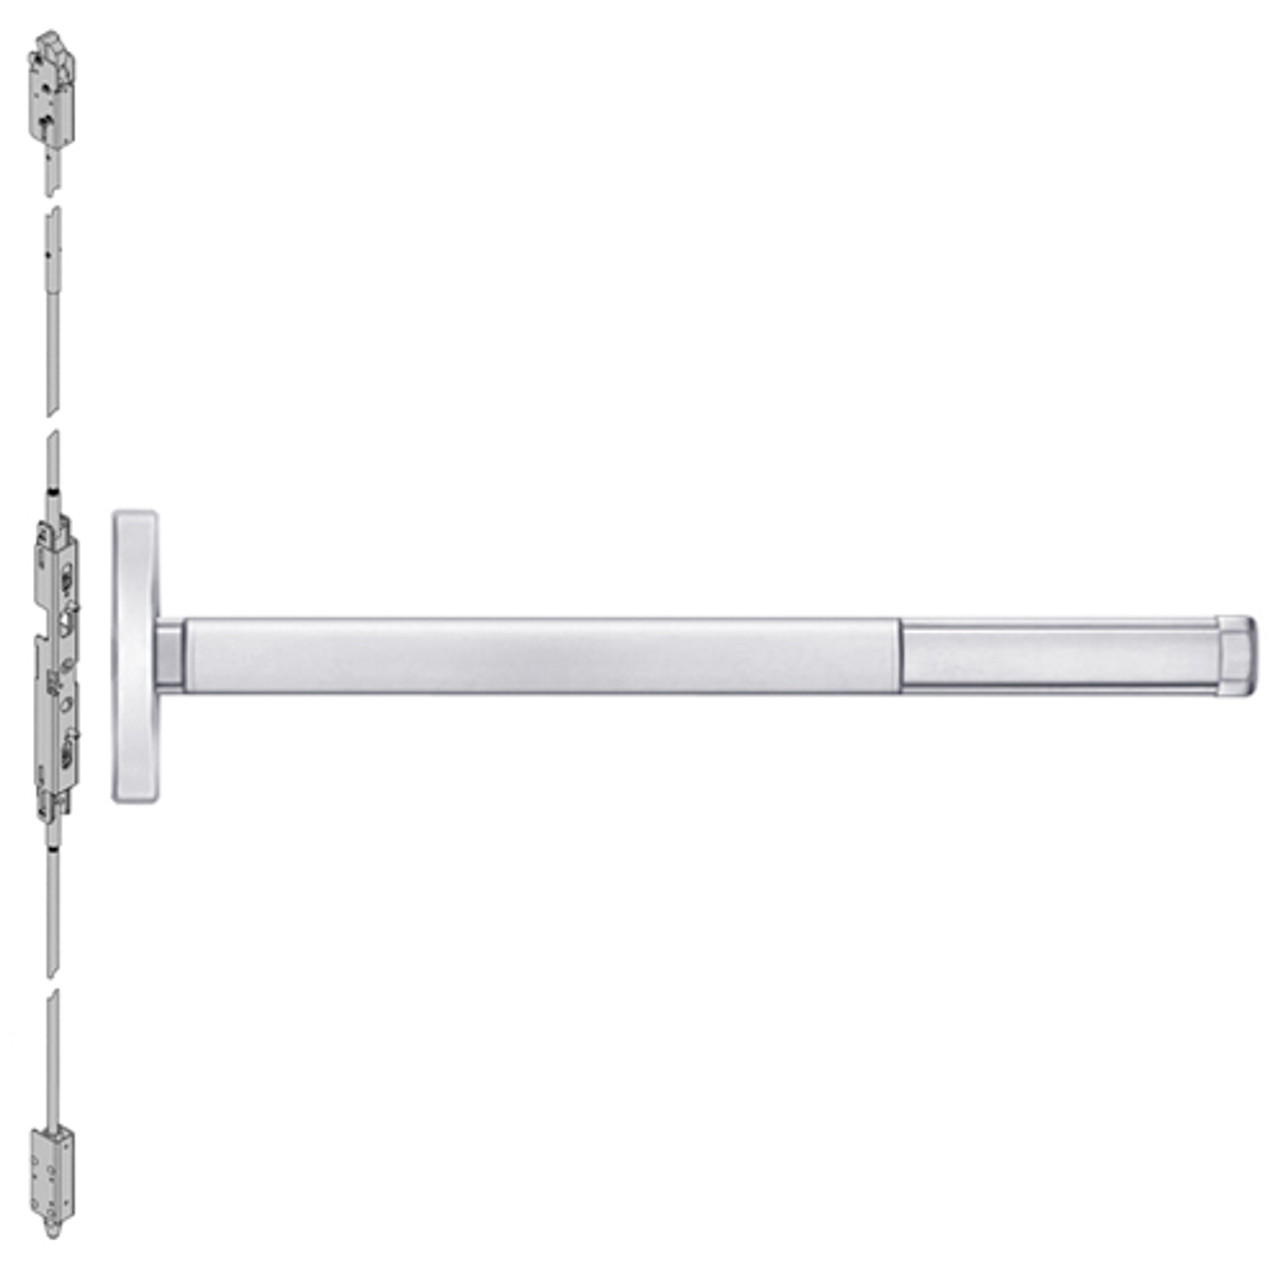 DE2601-625-36 PHI 2600 Series Concealed Vertical Rod Exit Device with Delayed Egress Prepped for Cover Plate in Bright Chrome Finish